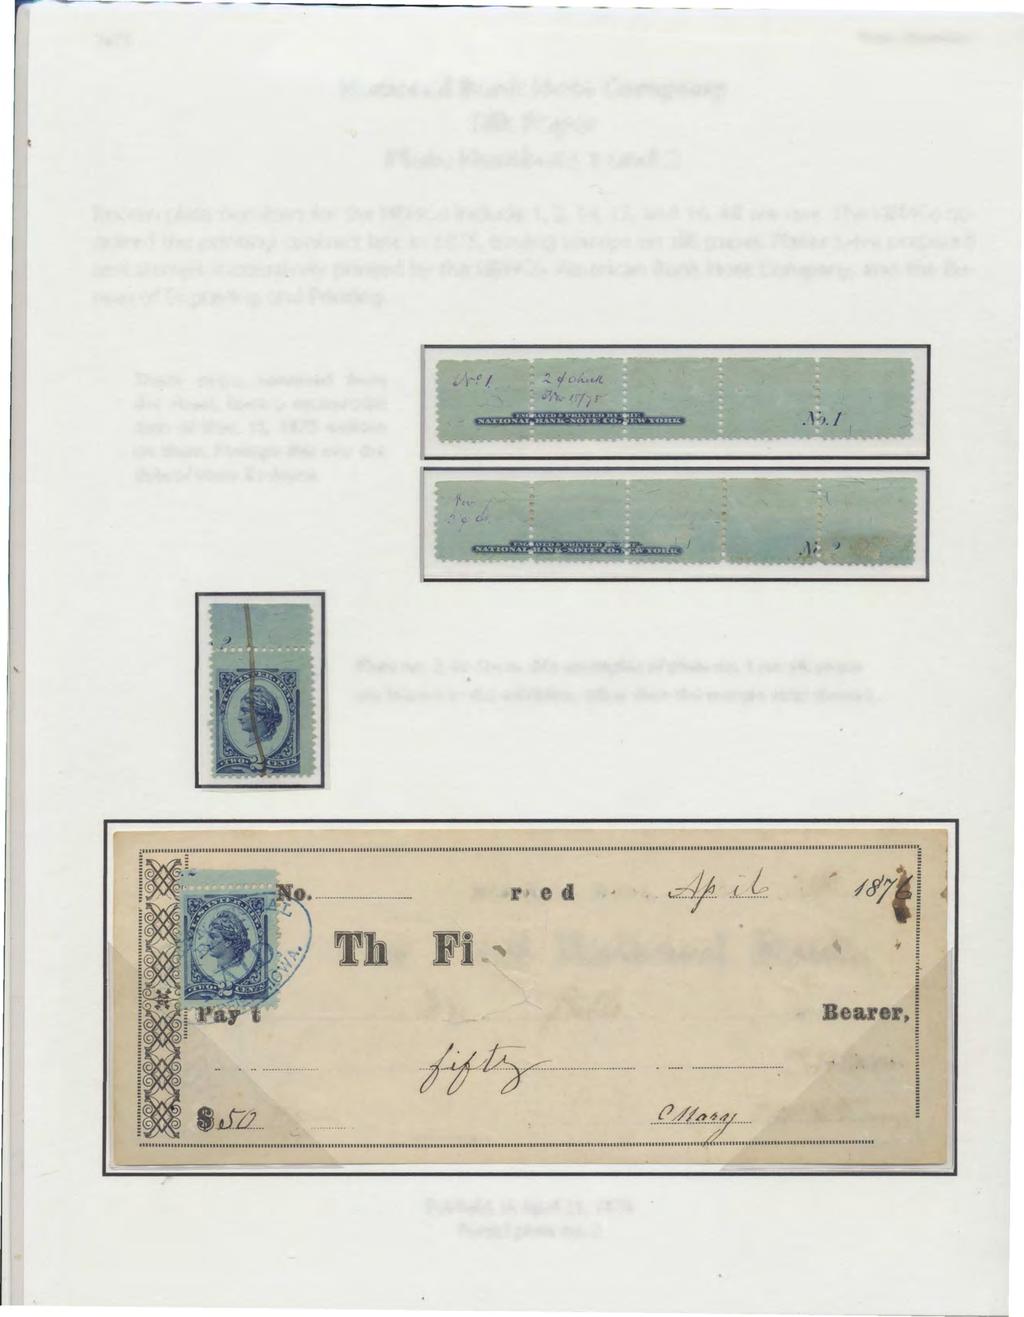 1875 Plate Numbers National Bank Note Company Silk Paper Plate Numbers 1 and 2 Known plate numbers for the NBNCo include 1, 2, 14, 15, and 16. All are rare.